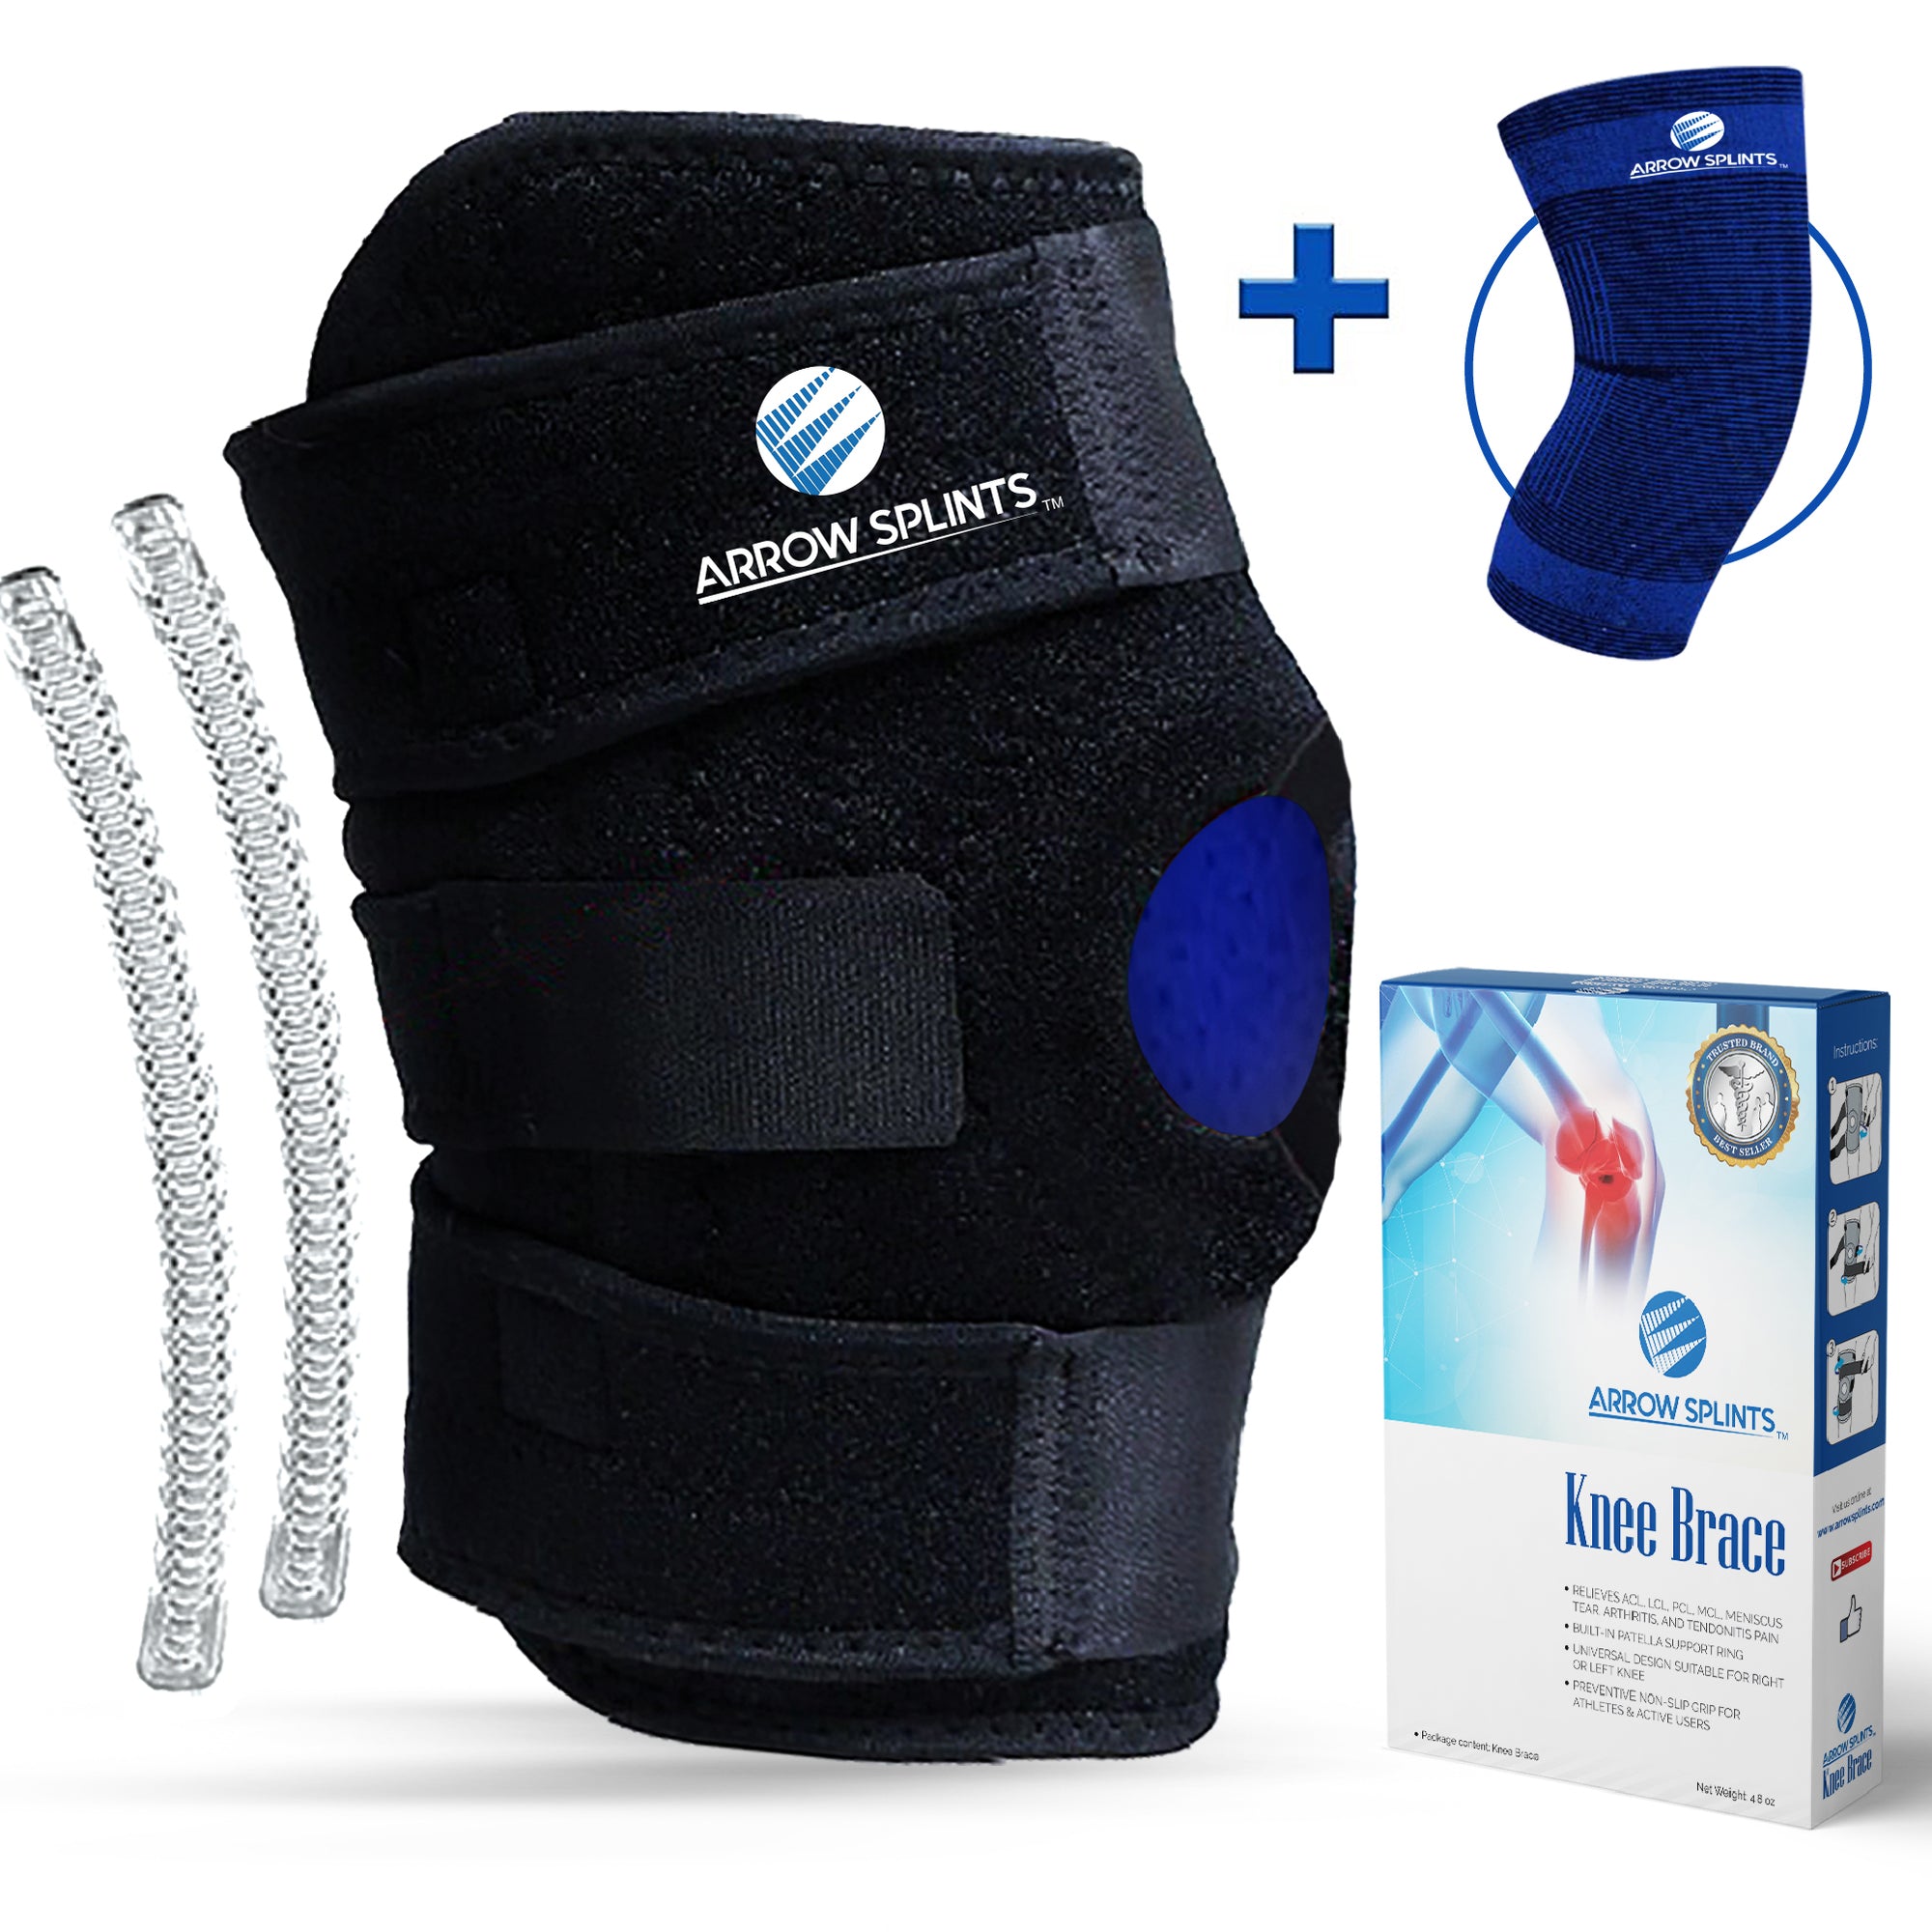 acl knee brace right, FOR AFTER ACL SURGERY. BRACE NEEDED. Save Money!  WORKED